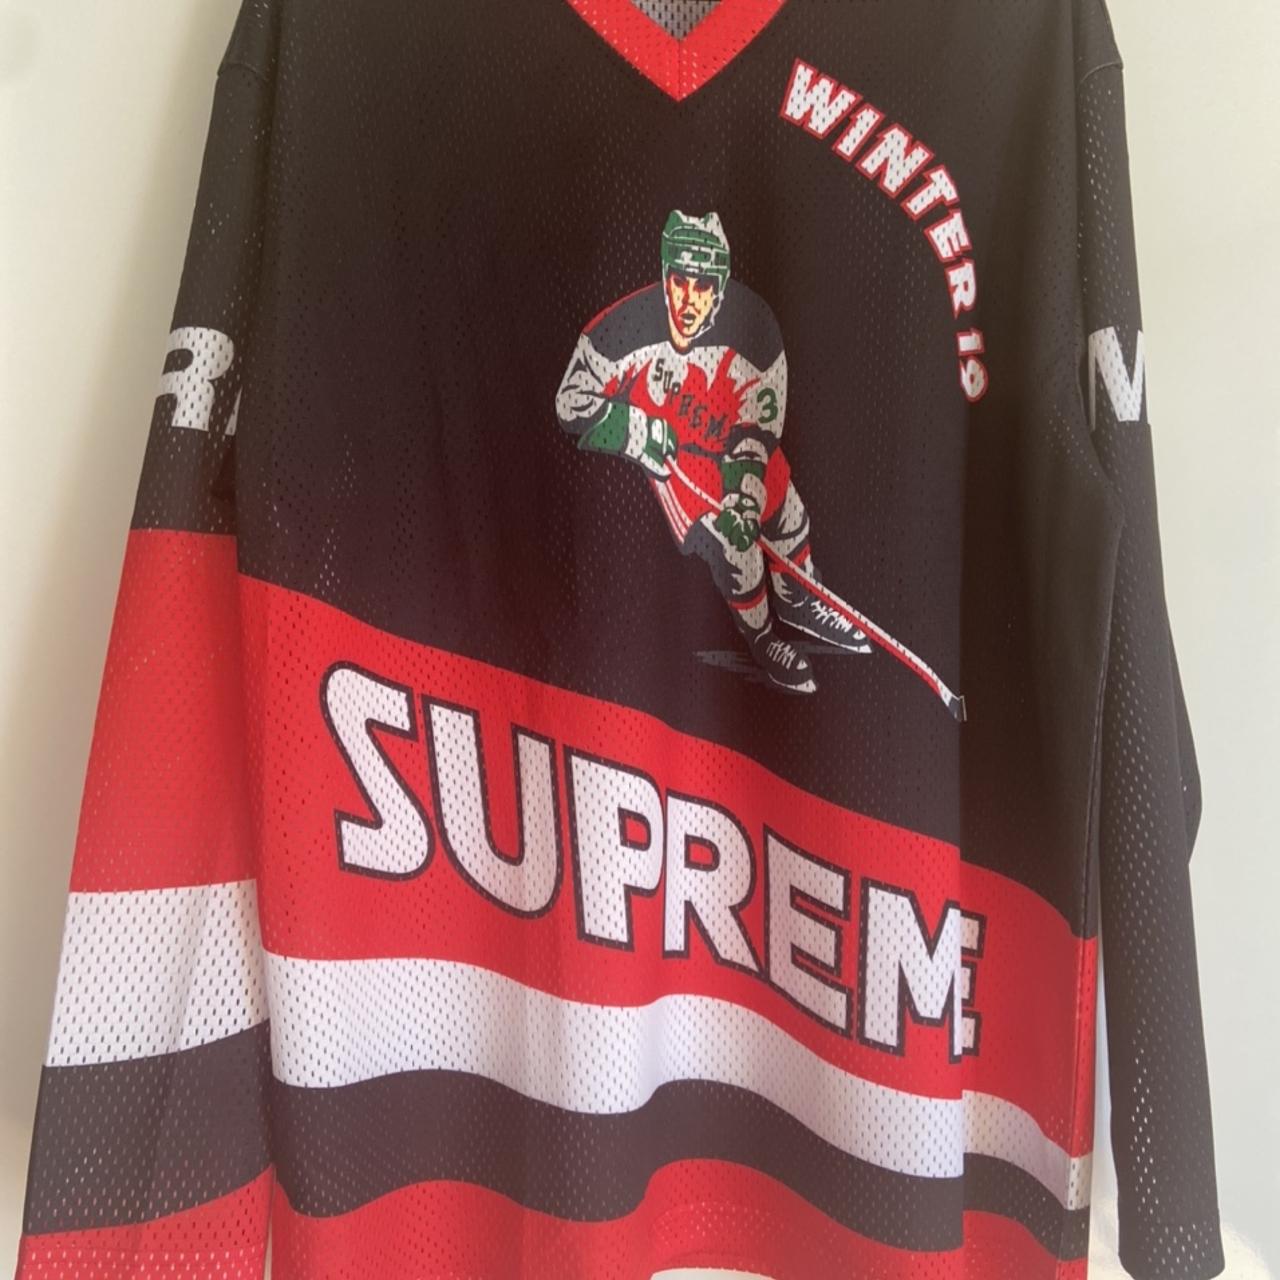 Supreme crossover hockey jersey. Never been worn...